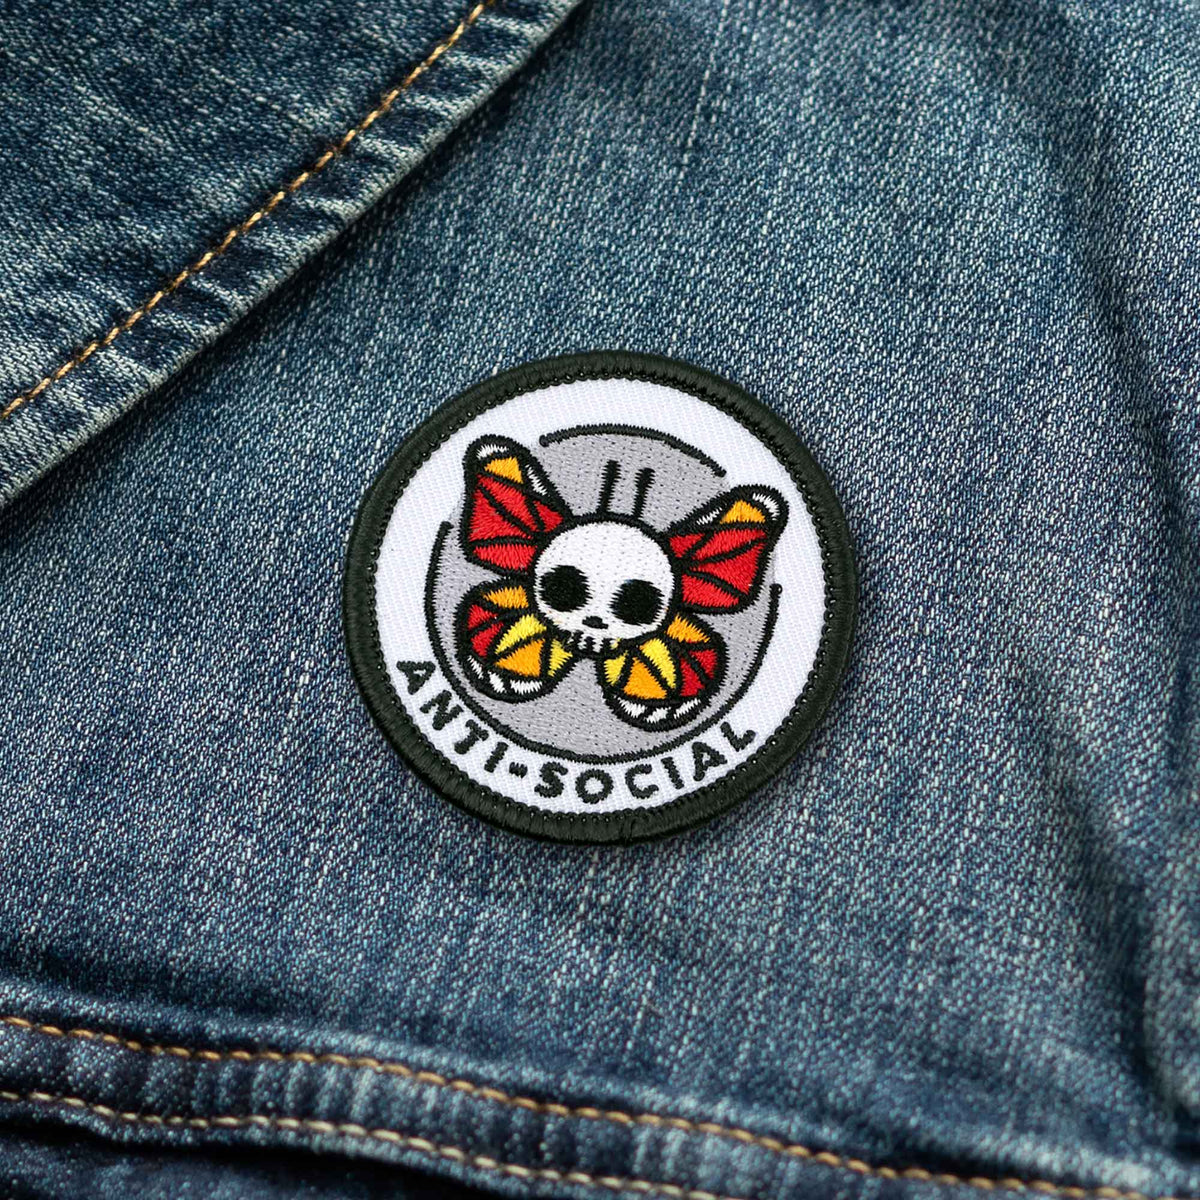 Anti-Social adulting merit badge patch for adults on denim jacket